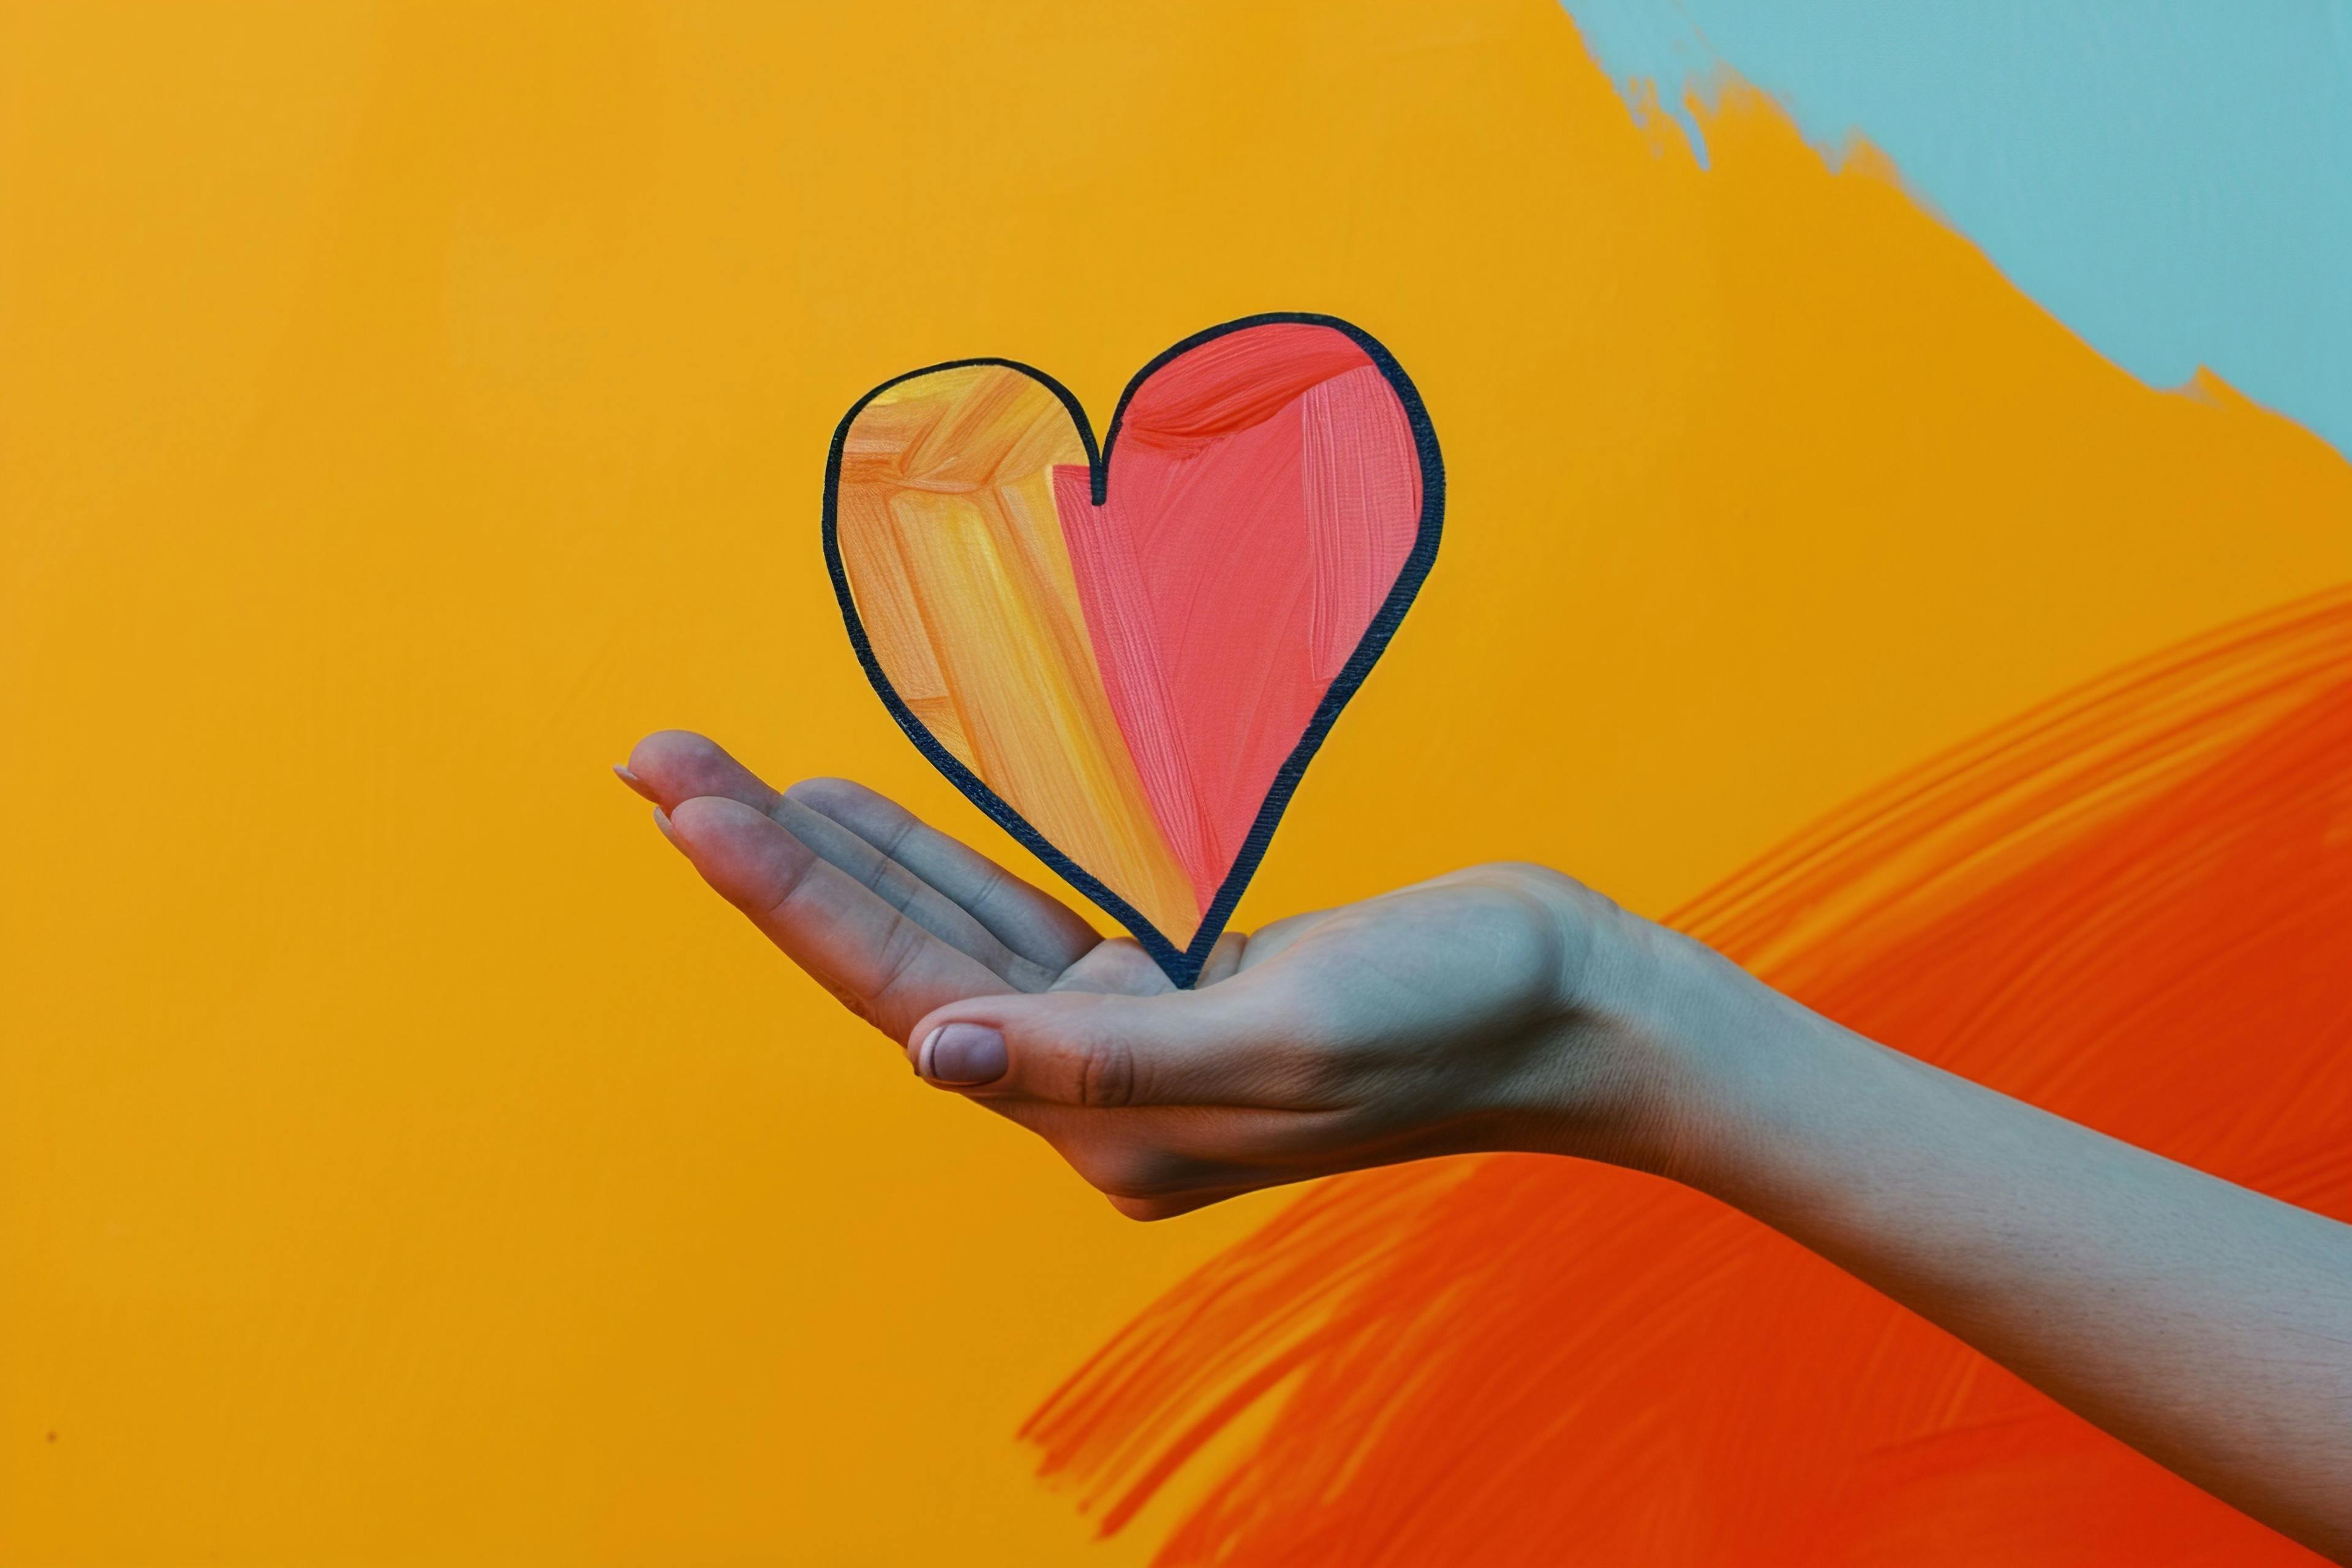 Self-Care Symbolized: Hand Holding Colorful Heart | Image credit: © Kristian - © stock.adobe.com 